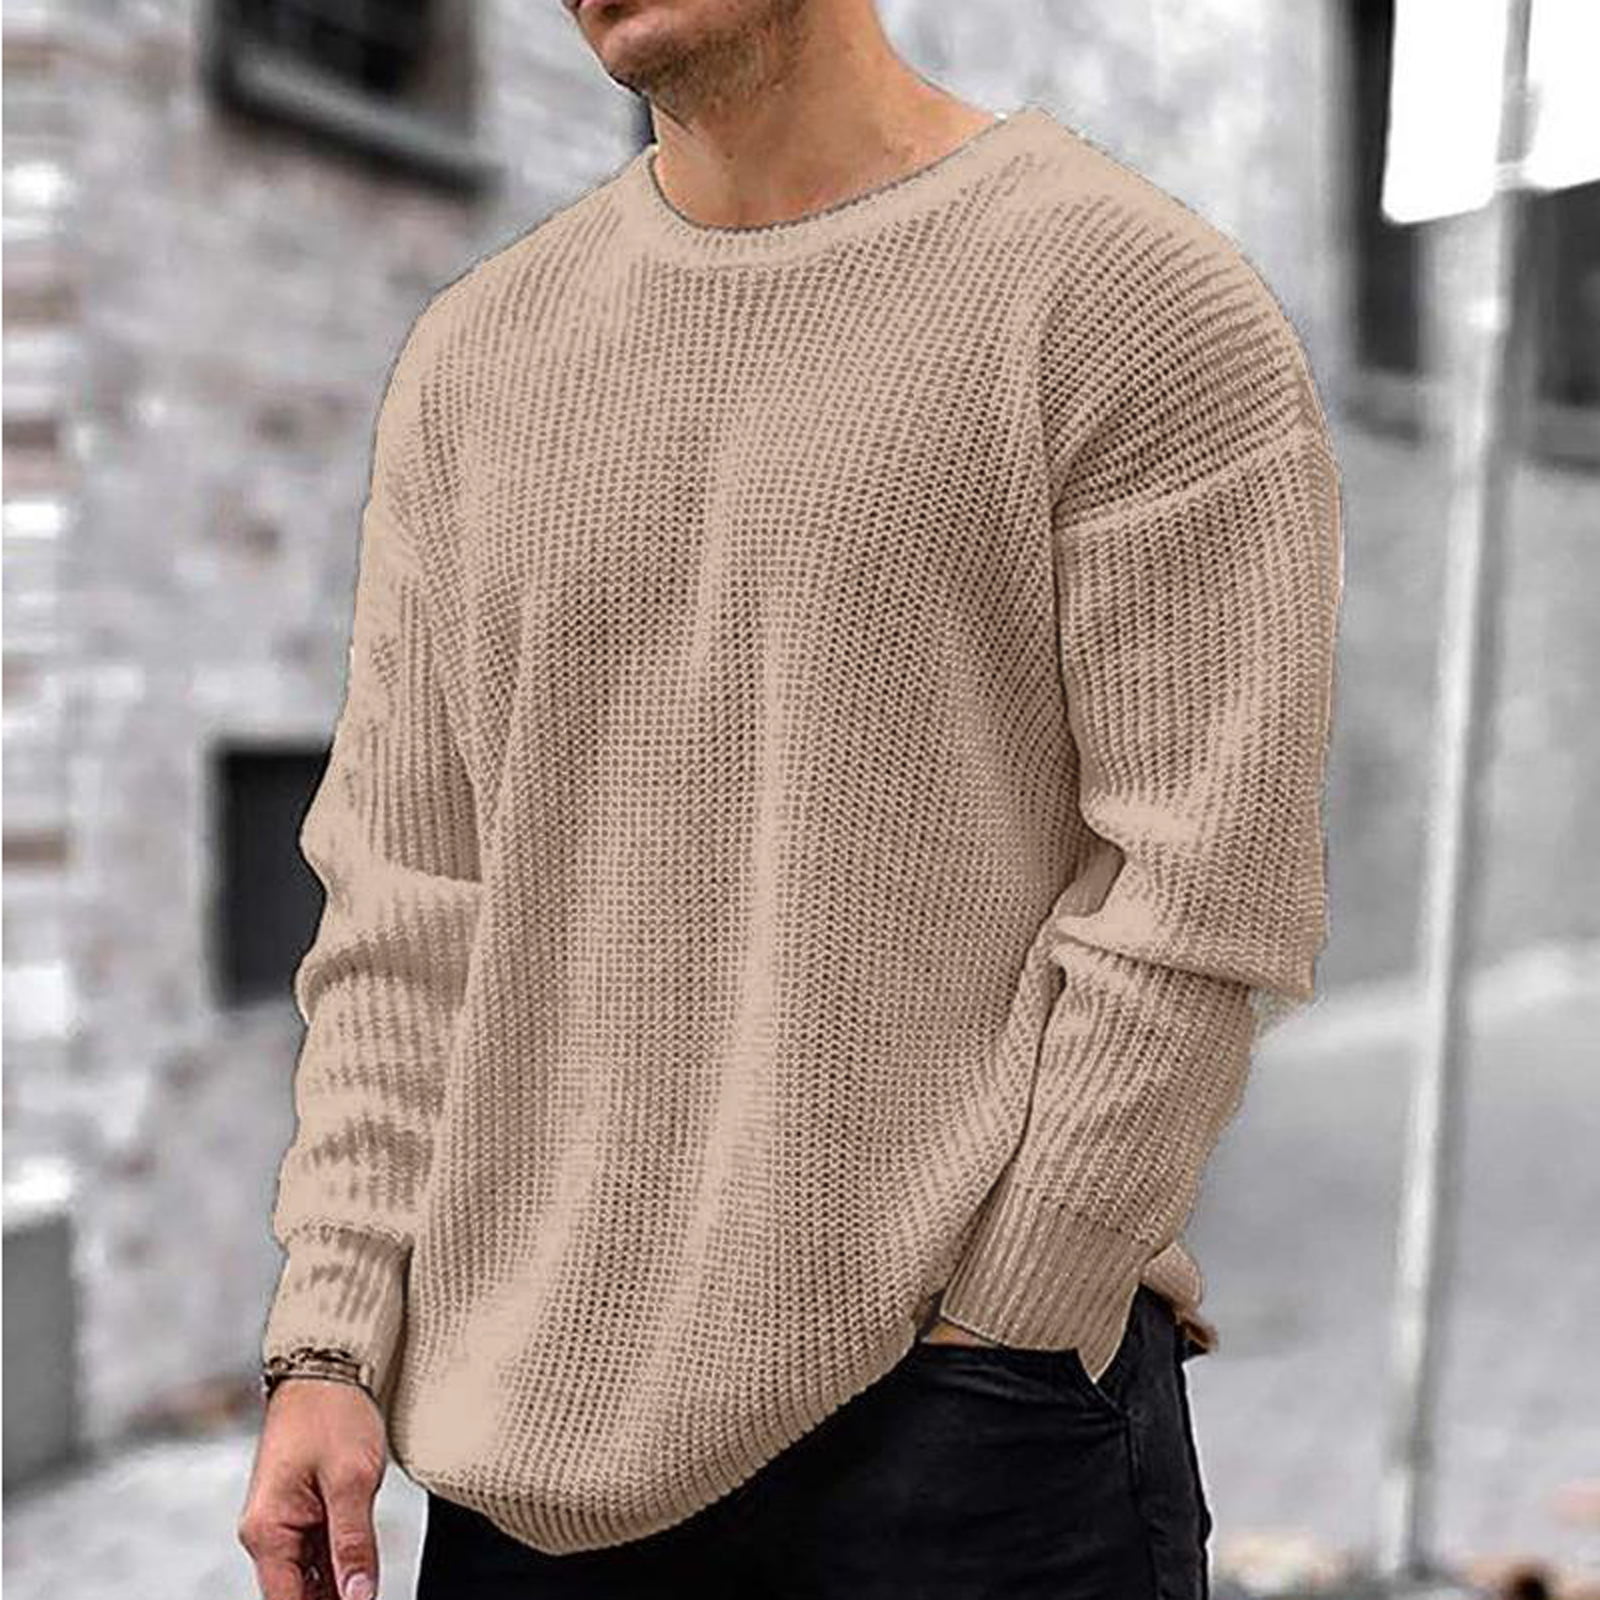 Sebaby Mens Fit Patterned Turtleneck Pullover Baggy Knit Pullover Sweater